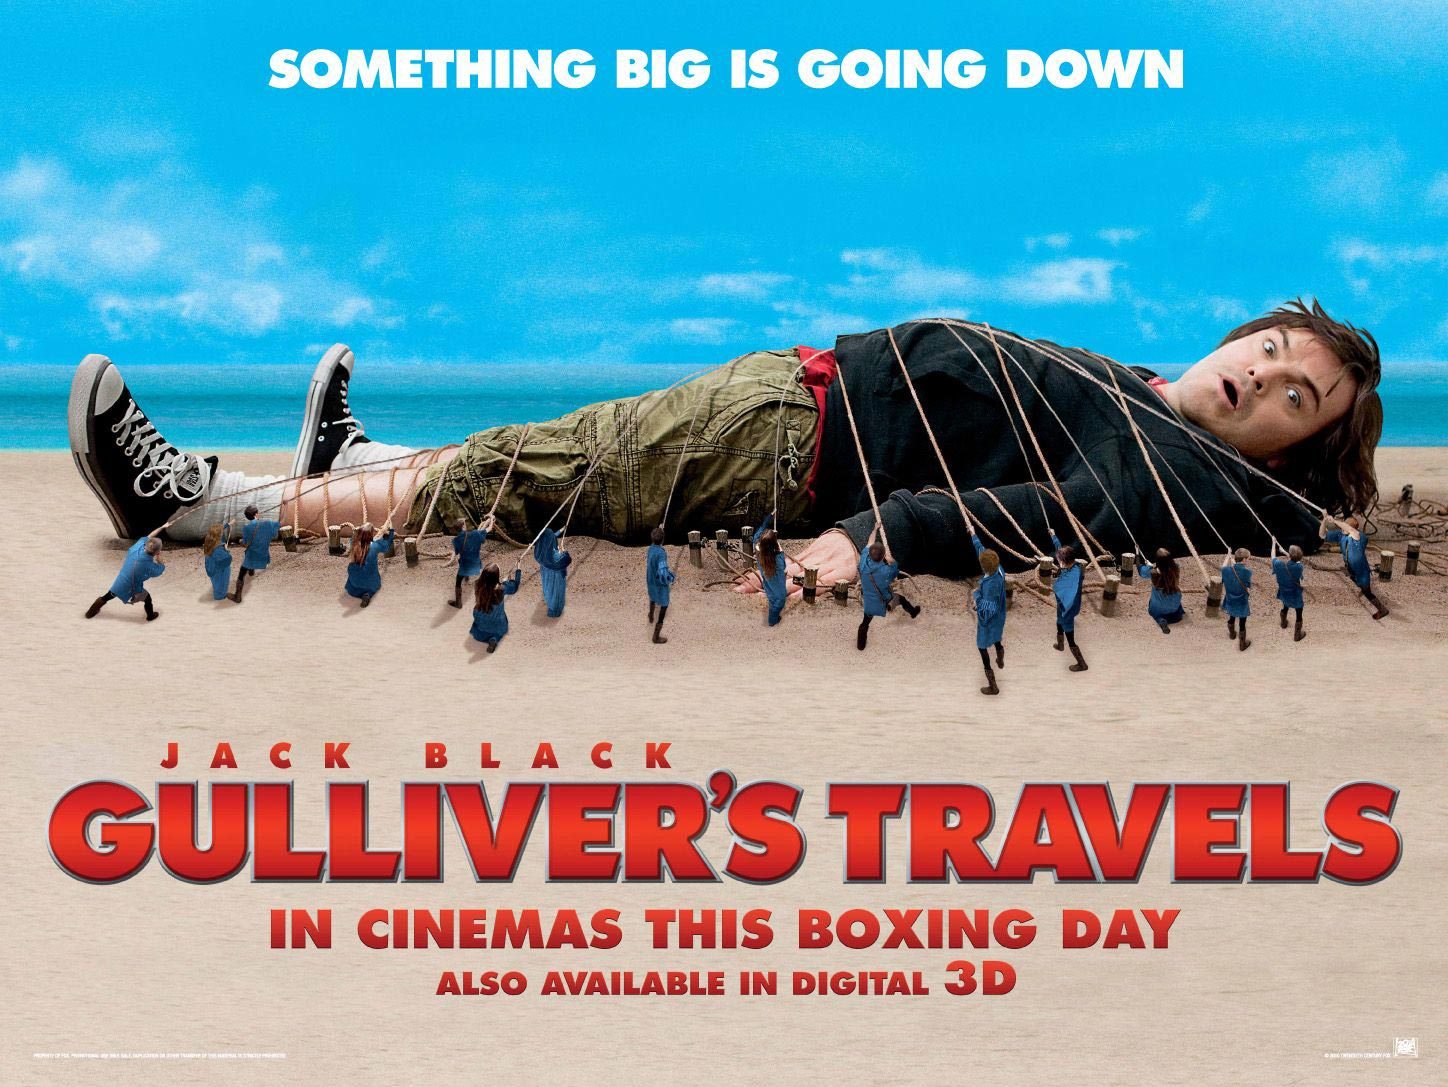 Images of Gulliver's Travels | 1448x1087